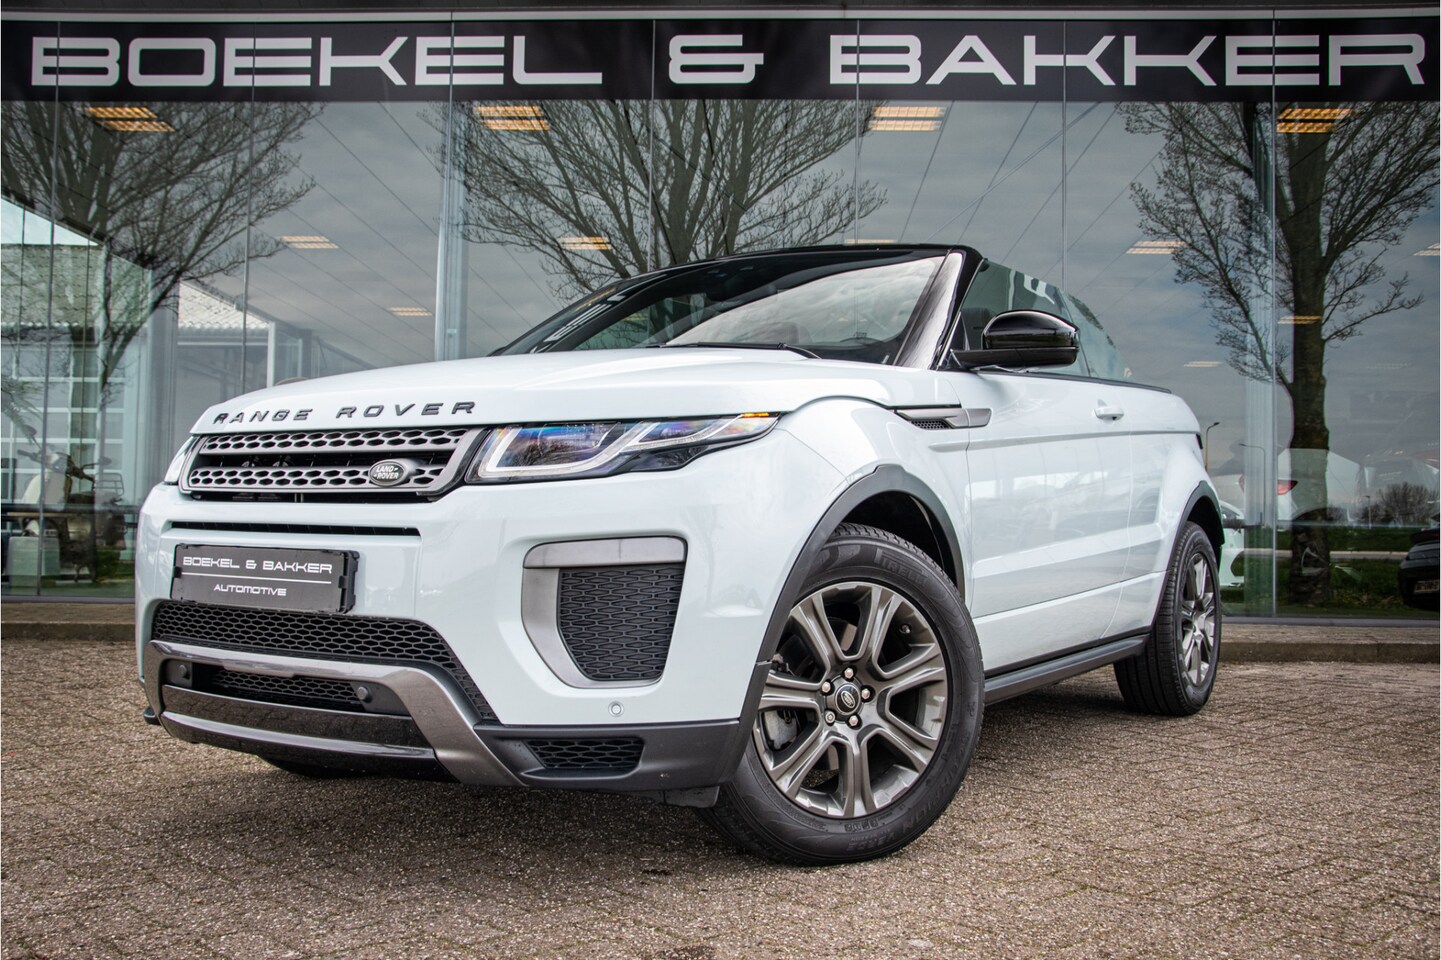 Bukken Rond en rond bevroren land rover range rover evoque cabrio netherlands used – Search for your  used car on the parking